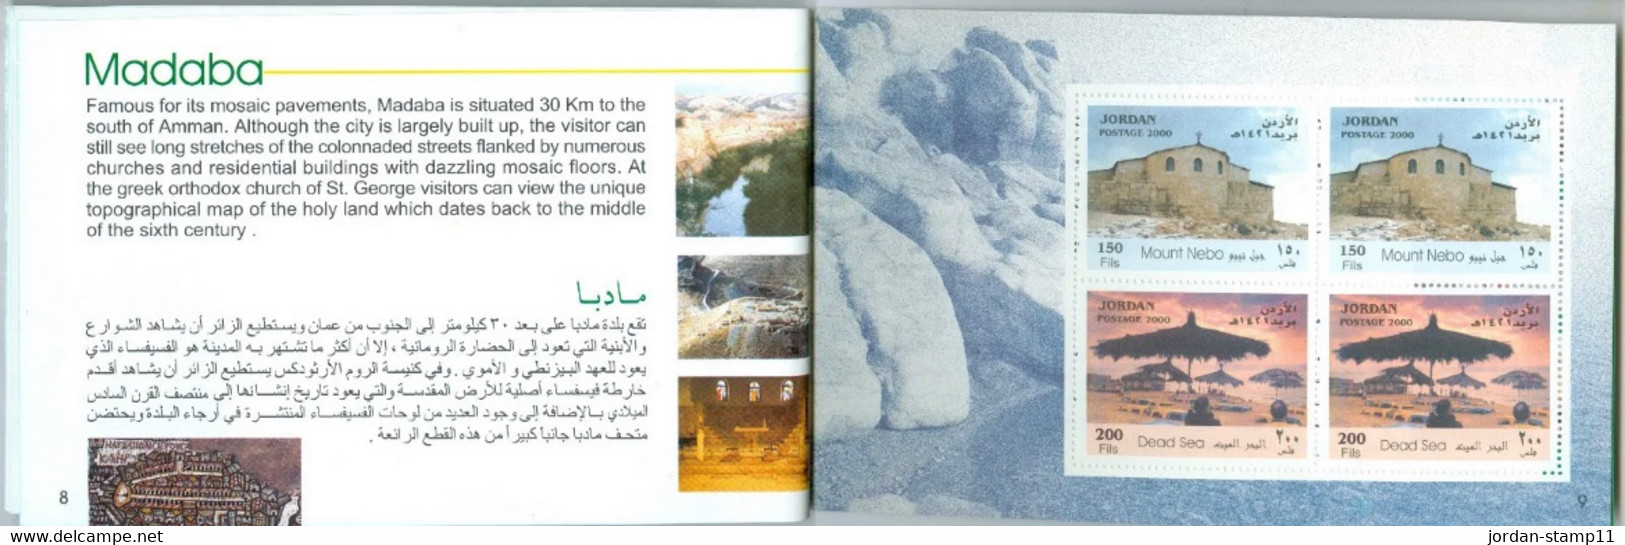 booklet Jordanian stamps for touristic sites